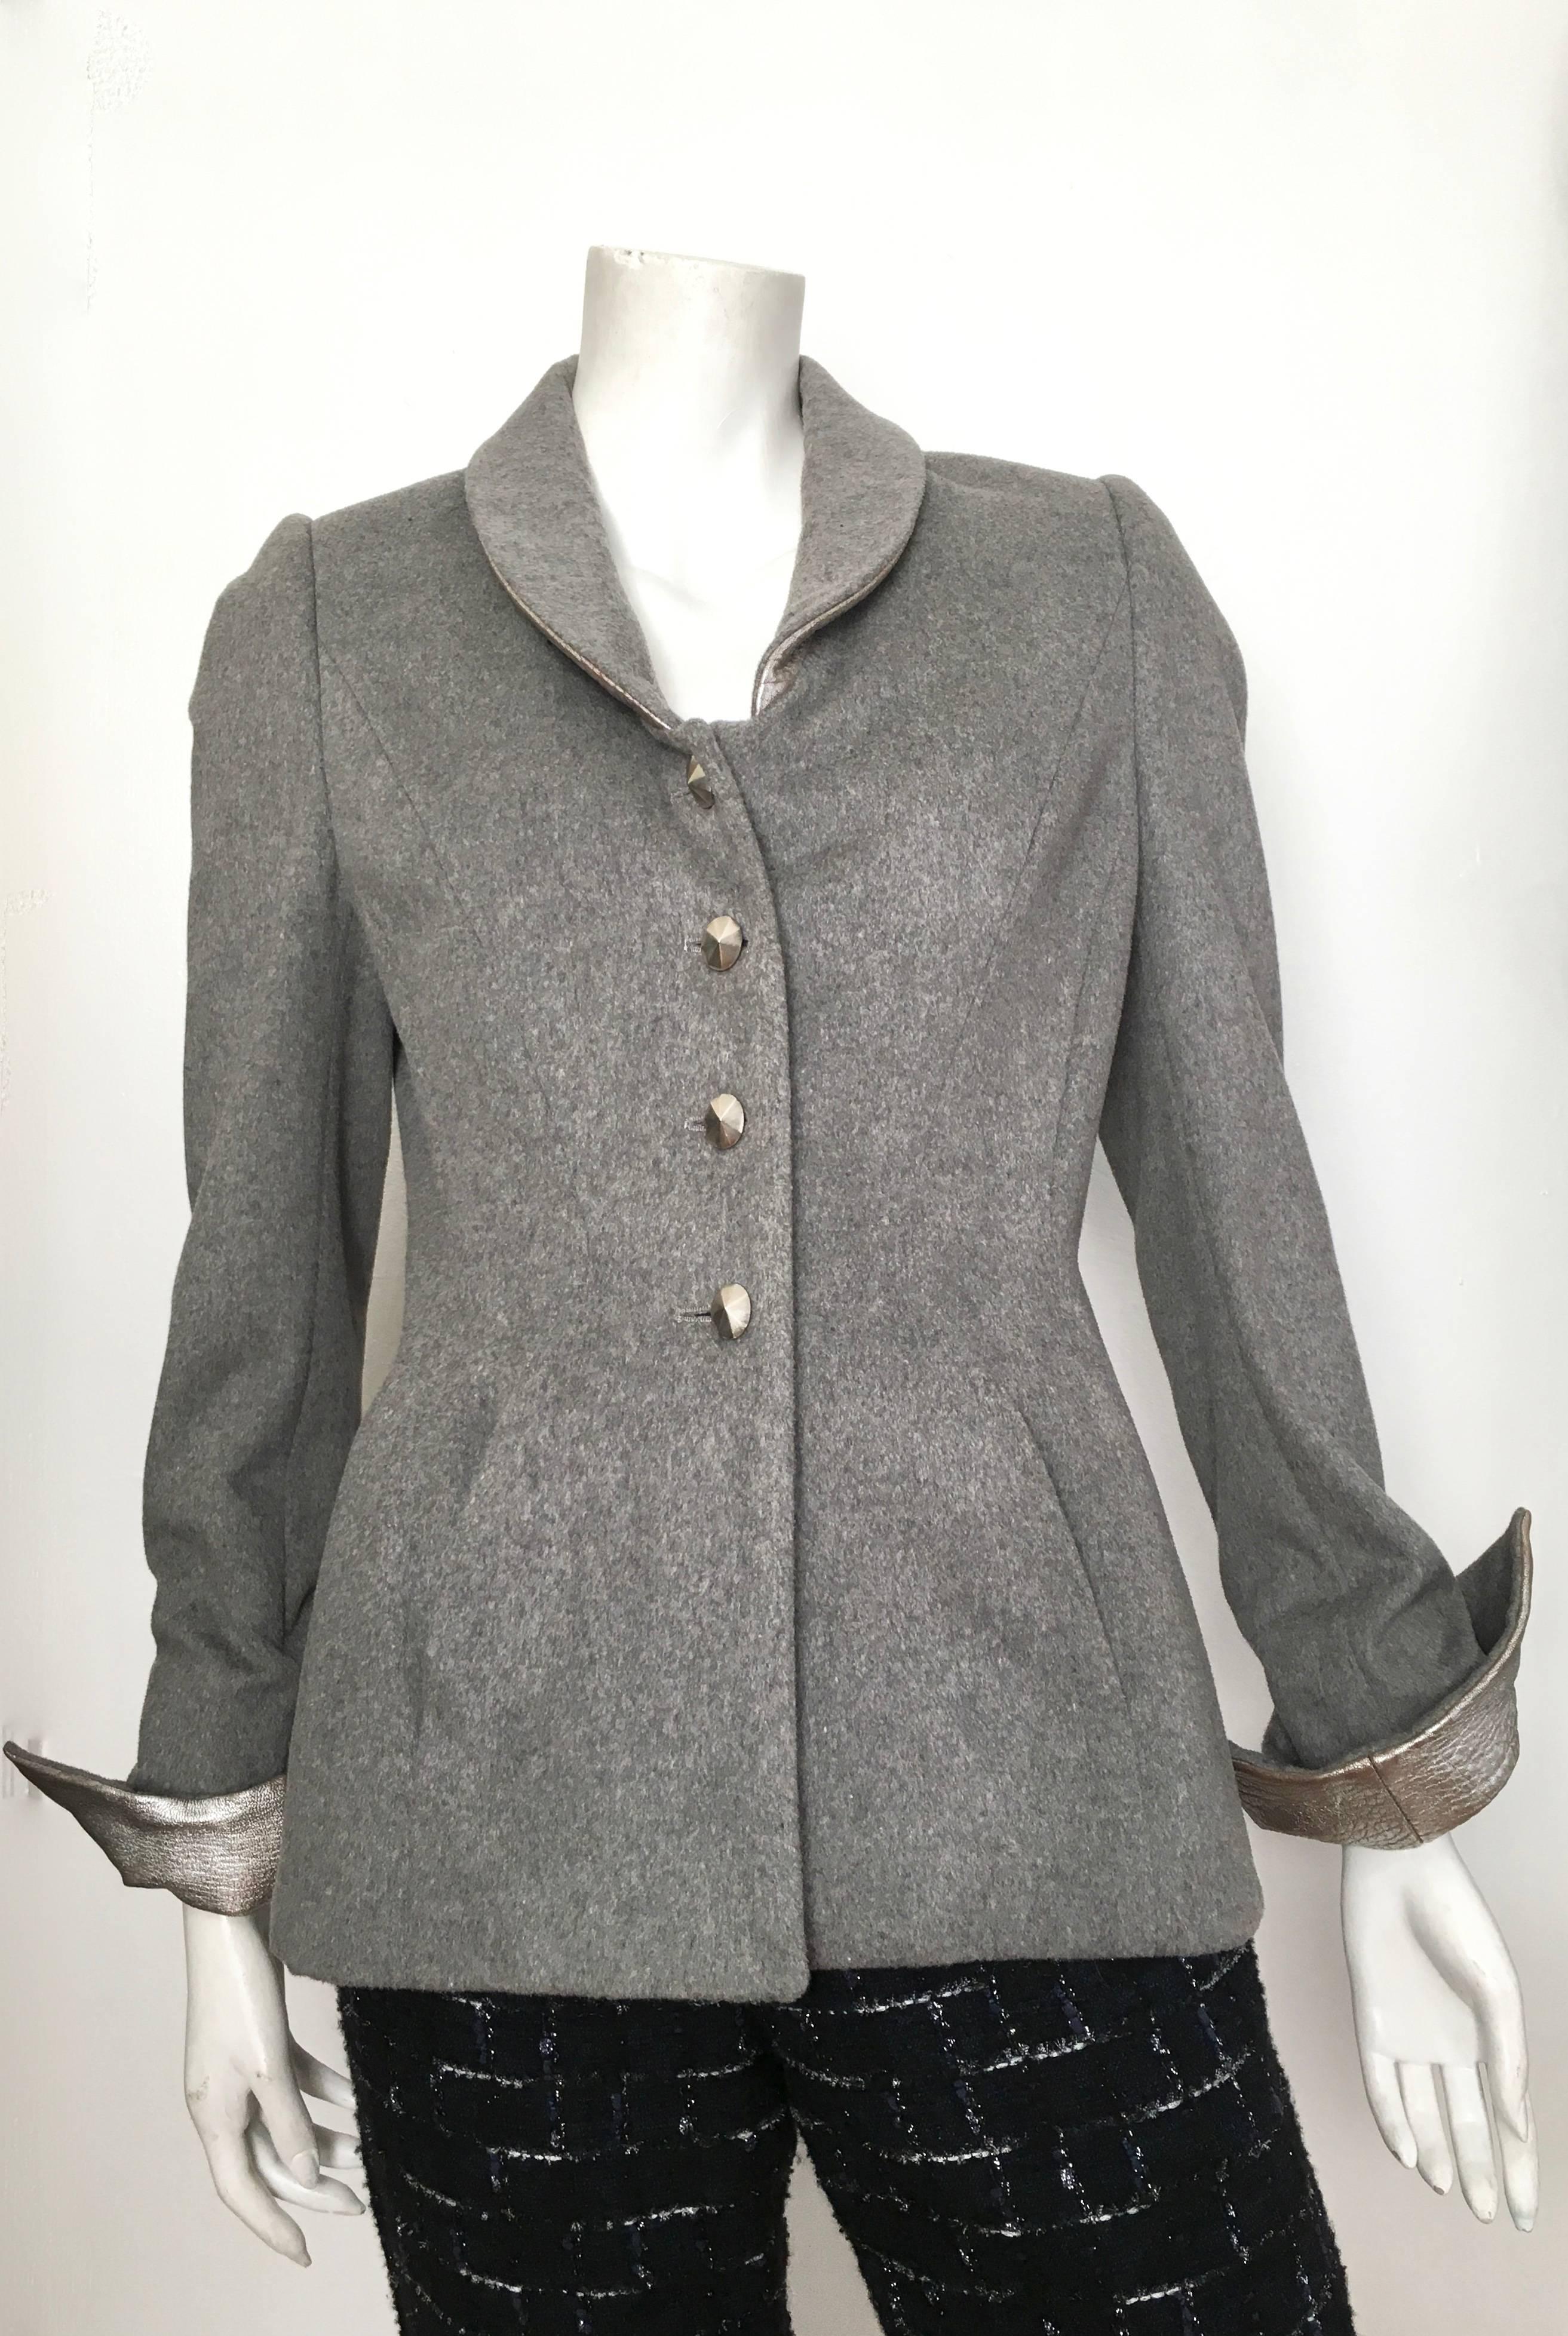 Wes Gordon grey wool & cashmere jacket with silver lambskin collar & cuffs with navy boucle pants is a size 8. Jacket has front curved pockets with amazing pleats on the backside of jacket. There are four silver faceted buttons on jacket. Pants have